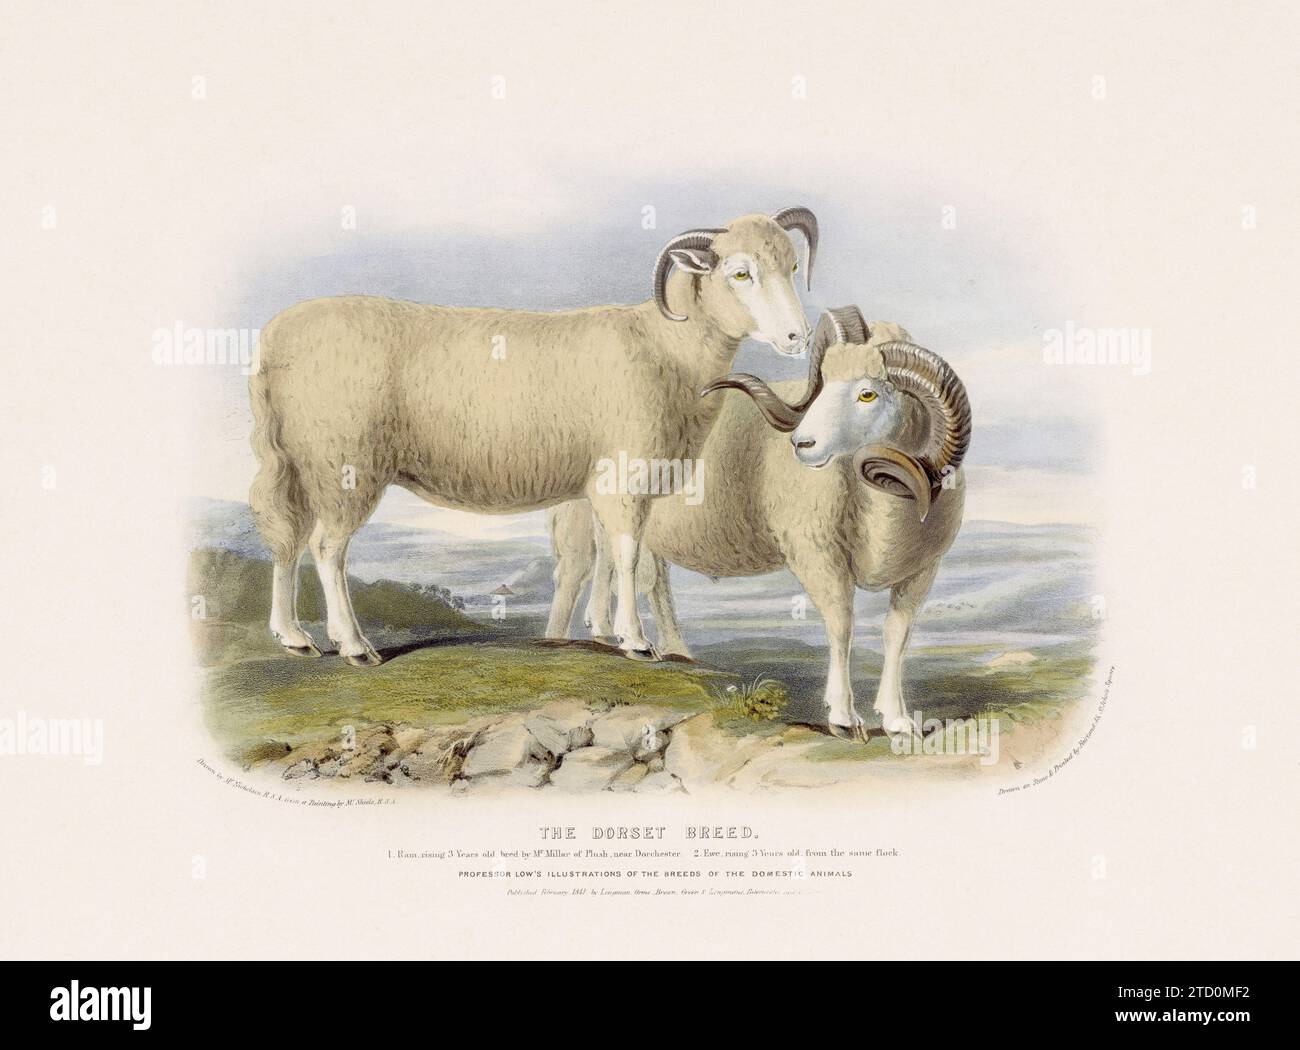 Vintage Sheep illustration from a mid-19th-century book on domestic animal breeds. Stock Photo